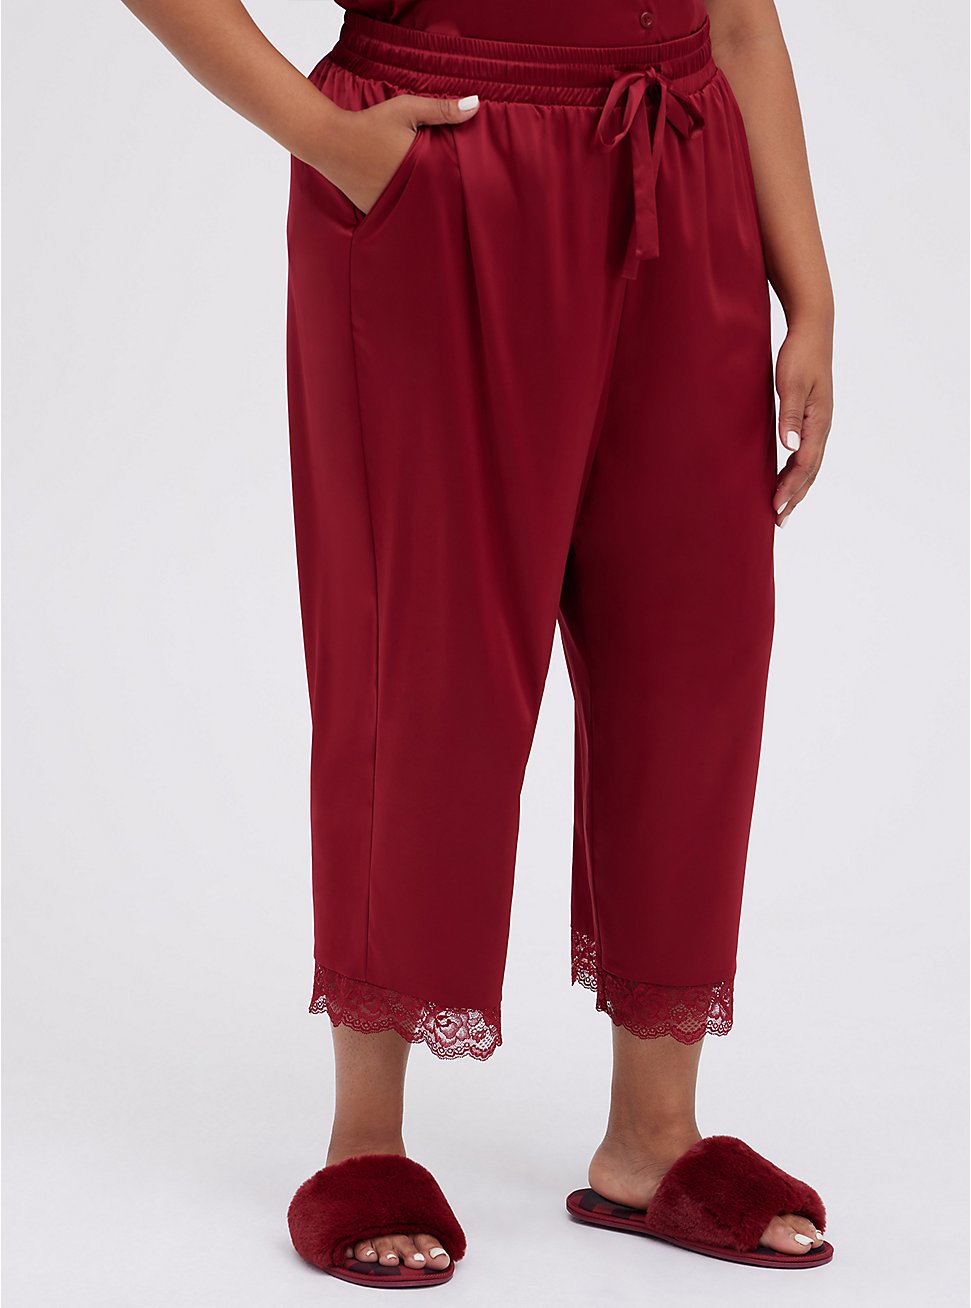 Sleep Pant - Dream Satin & Lace Crop Red, RED, hi-res